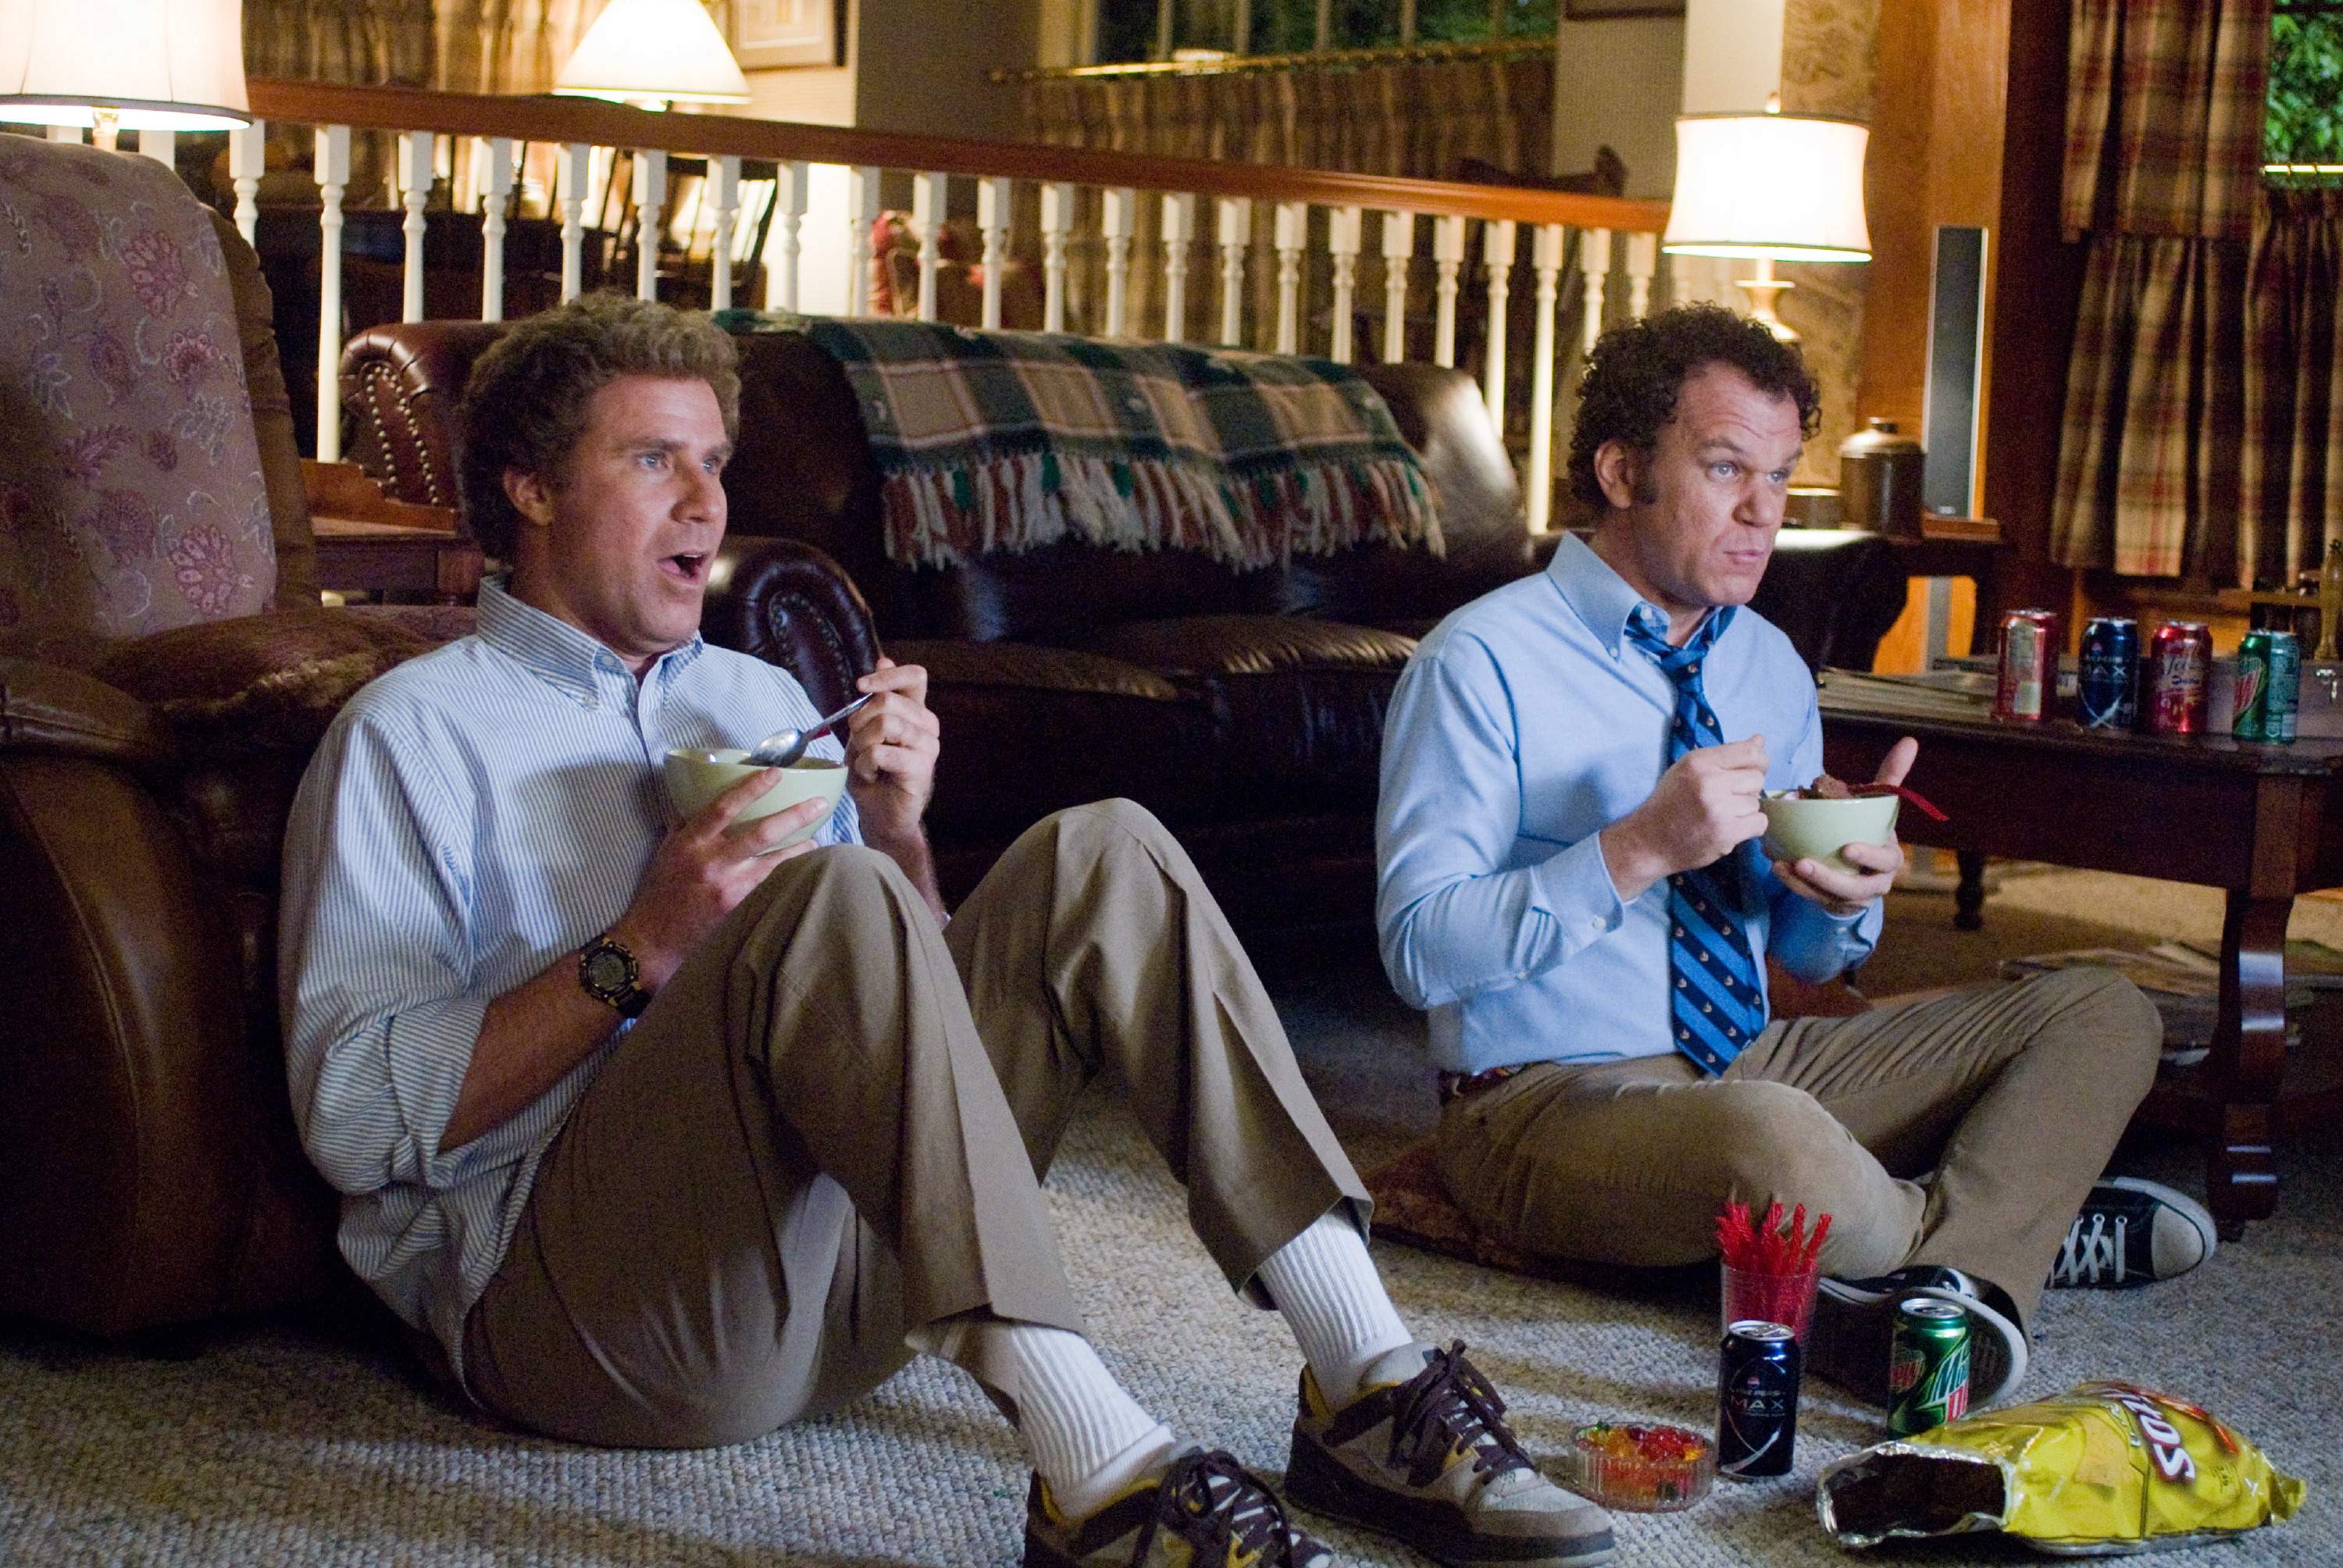 Will Ferrell as Brennan Huff (left) and John C. Reilly as Dale Doback (right) in Columbia Pictures' comedy STEP BROTHERS (2008).